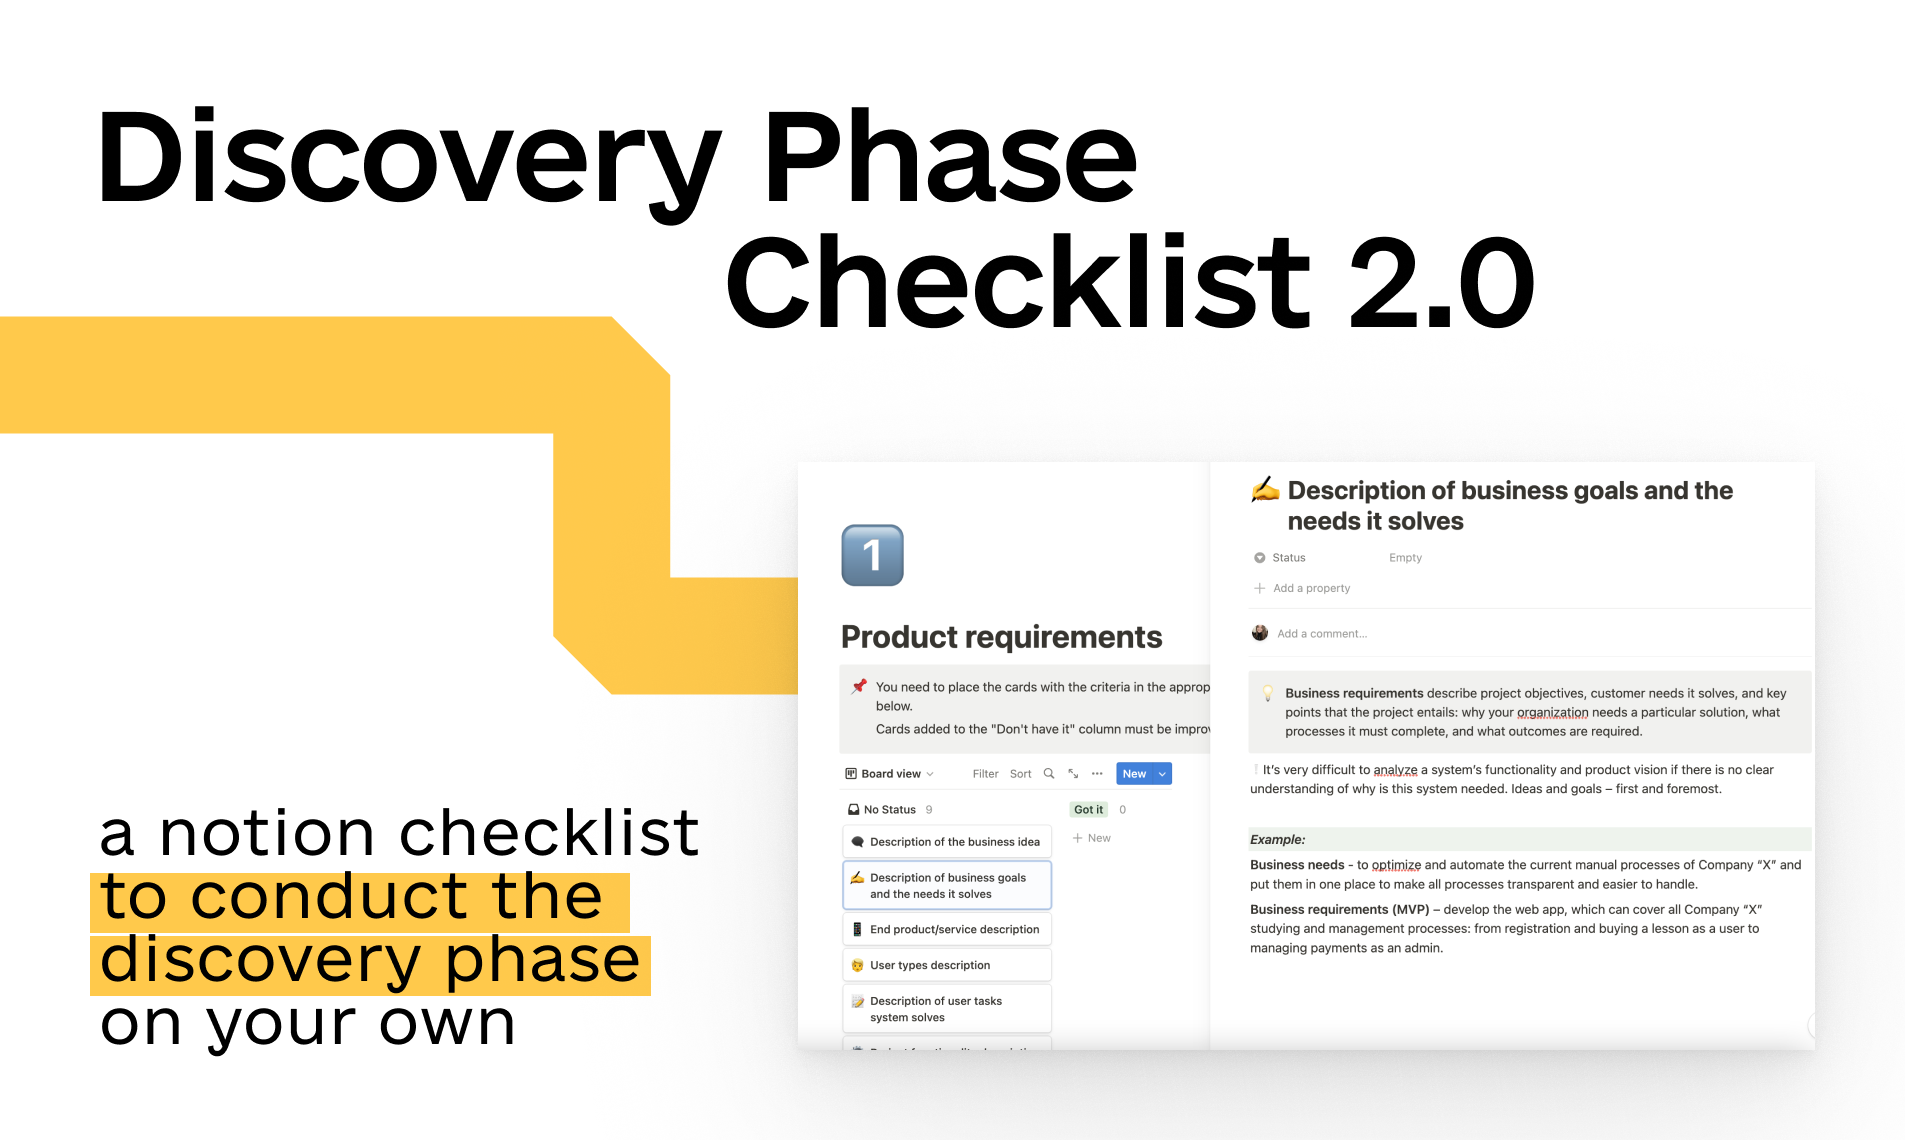 Discovery Phase Checklist 2.0